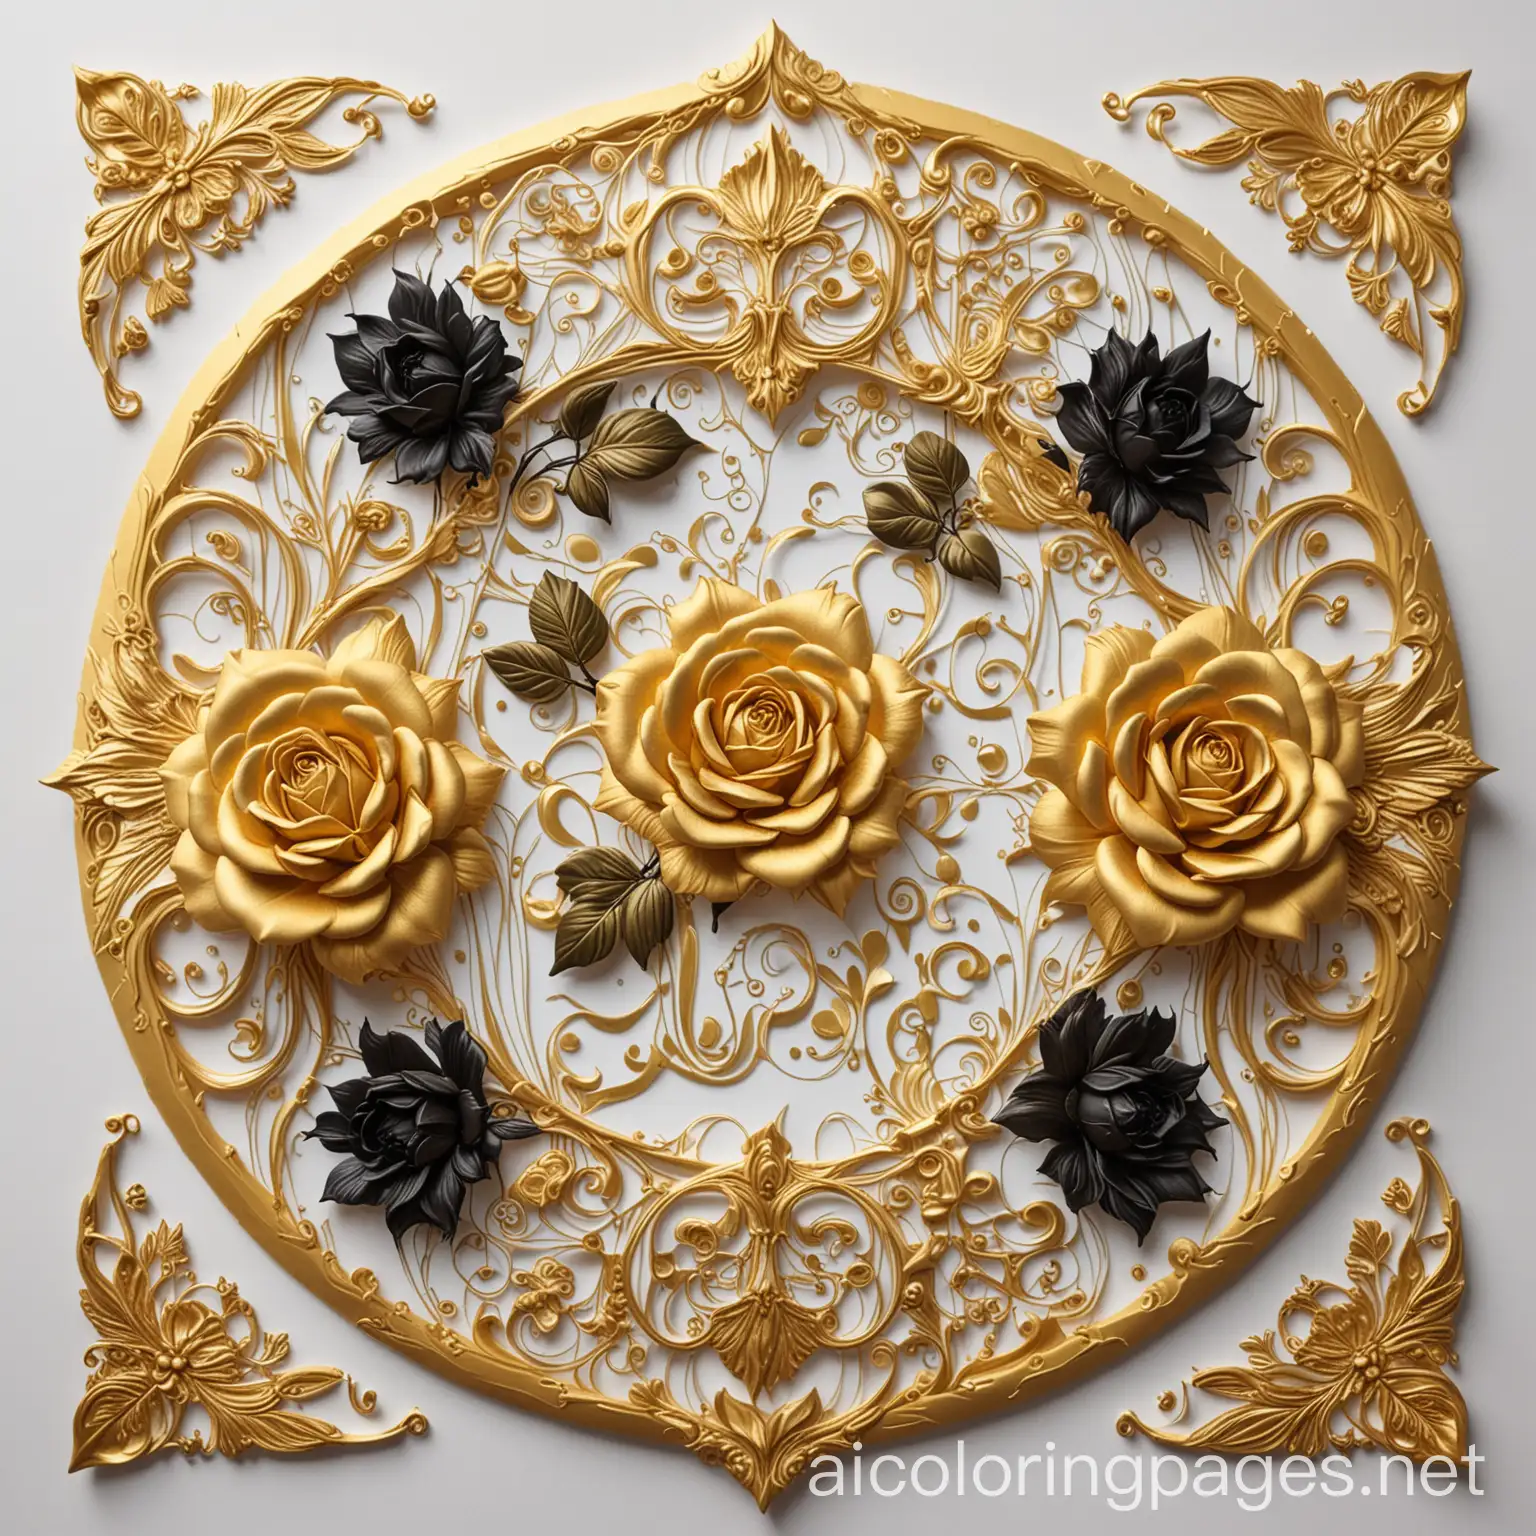  Realistic 3D coloring page with "NADA" in gold in the center, surrounded by black and gold roses and swirls. Line art with a plain white background for simplicity and ample white space. Easy-to-distinguish outlines for simple coloring within the lines.